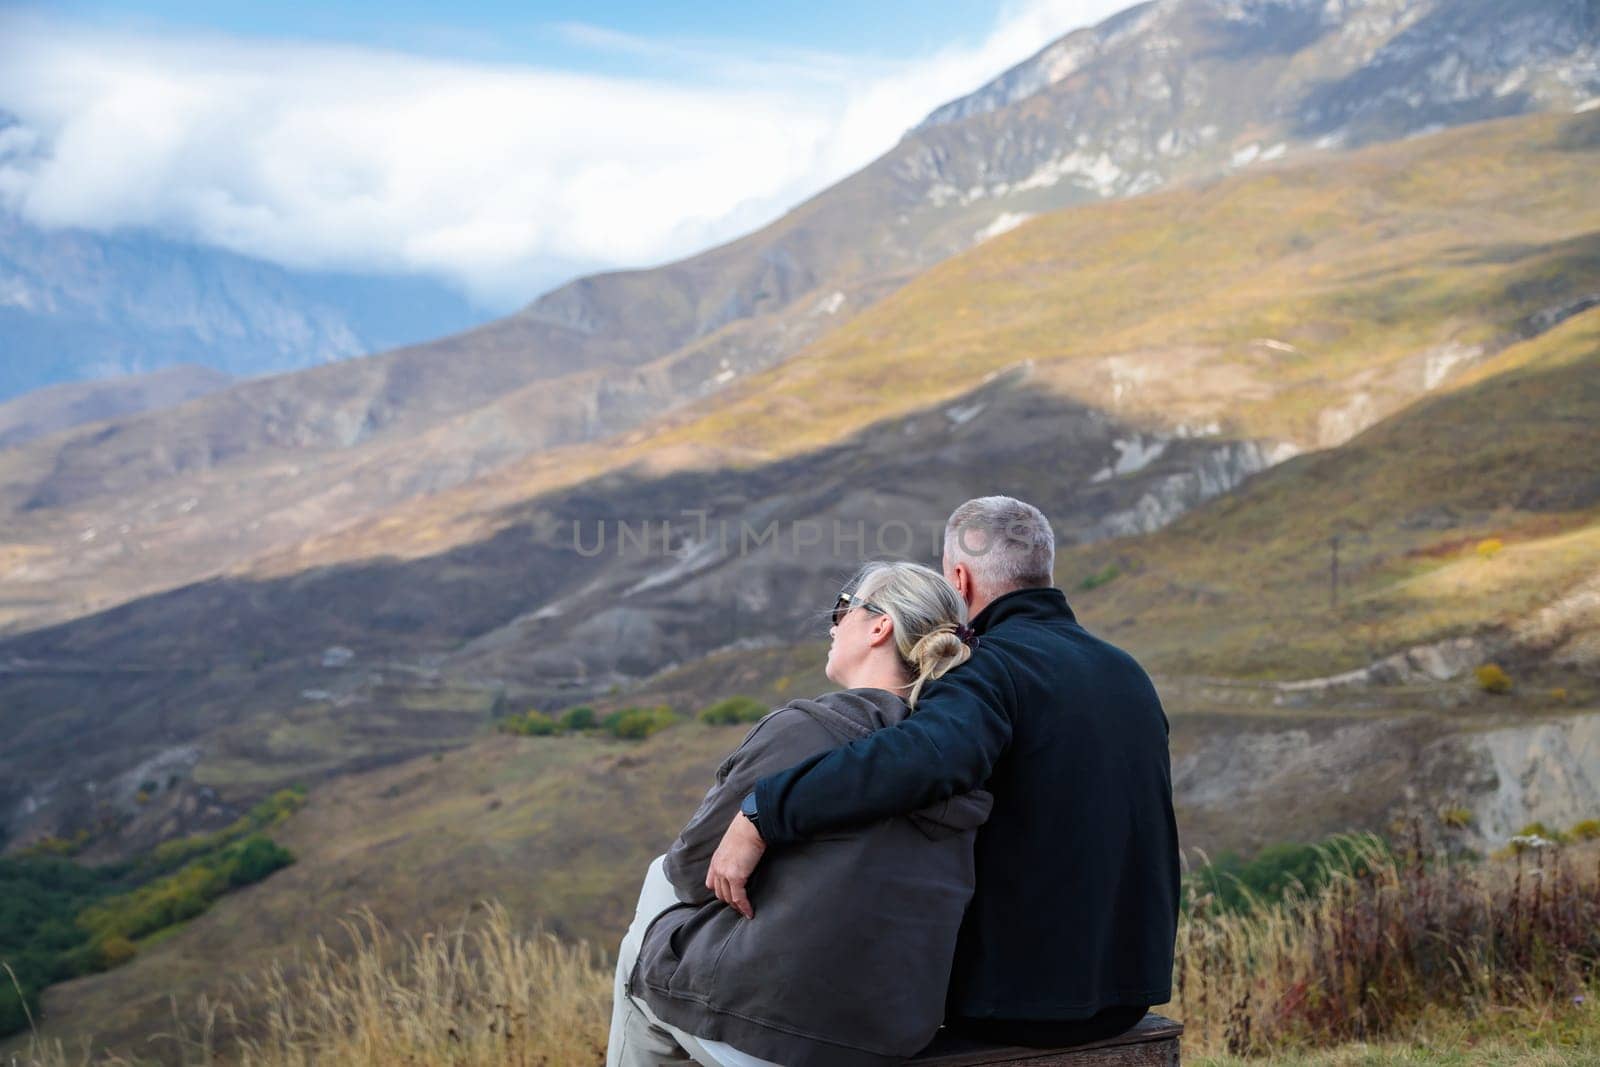 In the mountains, a couple in love enjoying the view of the landscape by Yurich32